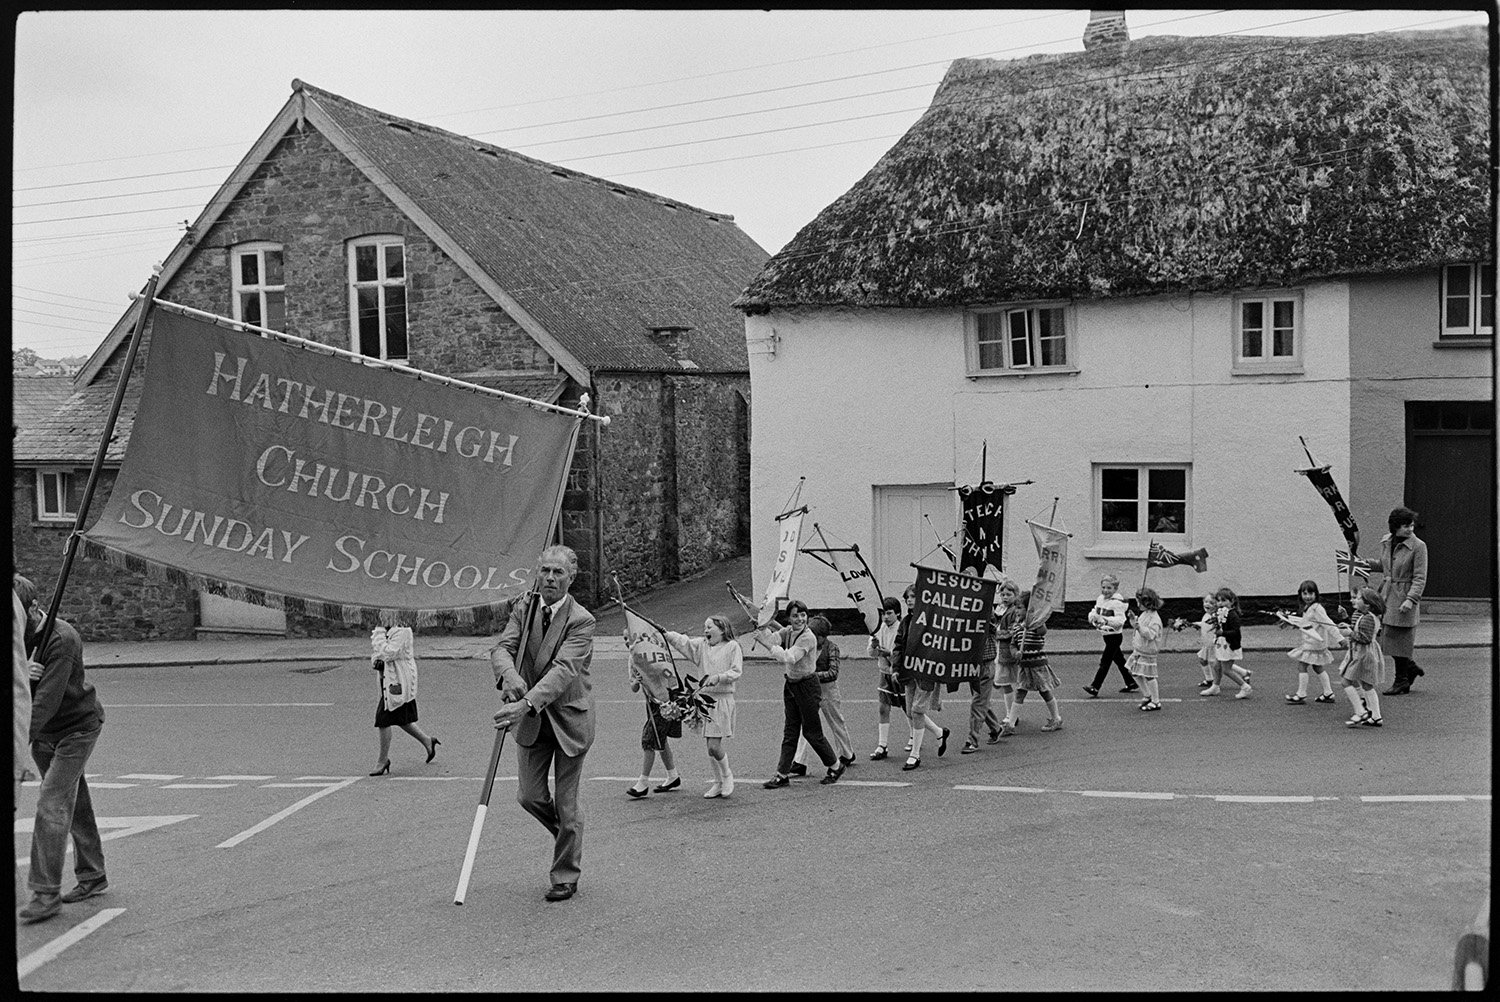 Church Sunday School Parade with banners and Silver Band marching behind garland.
[A line of children walking in the Hatherleigh Church Sunday Schools Parade, being led by two men carrying a large banner. The children are carrying smaller banners. Behind the children is a house with a thatched roof.]